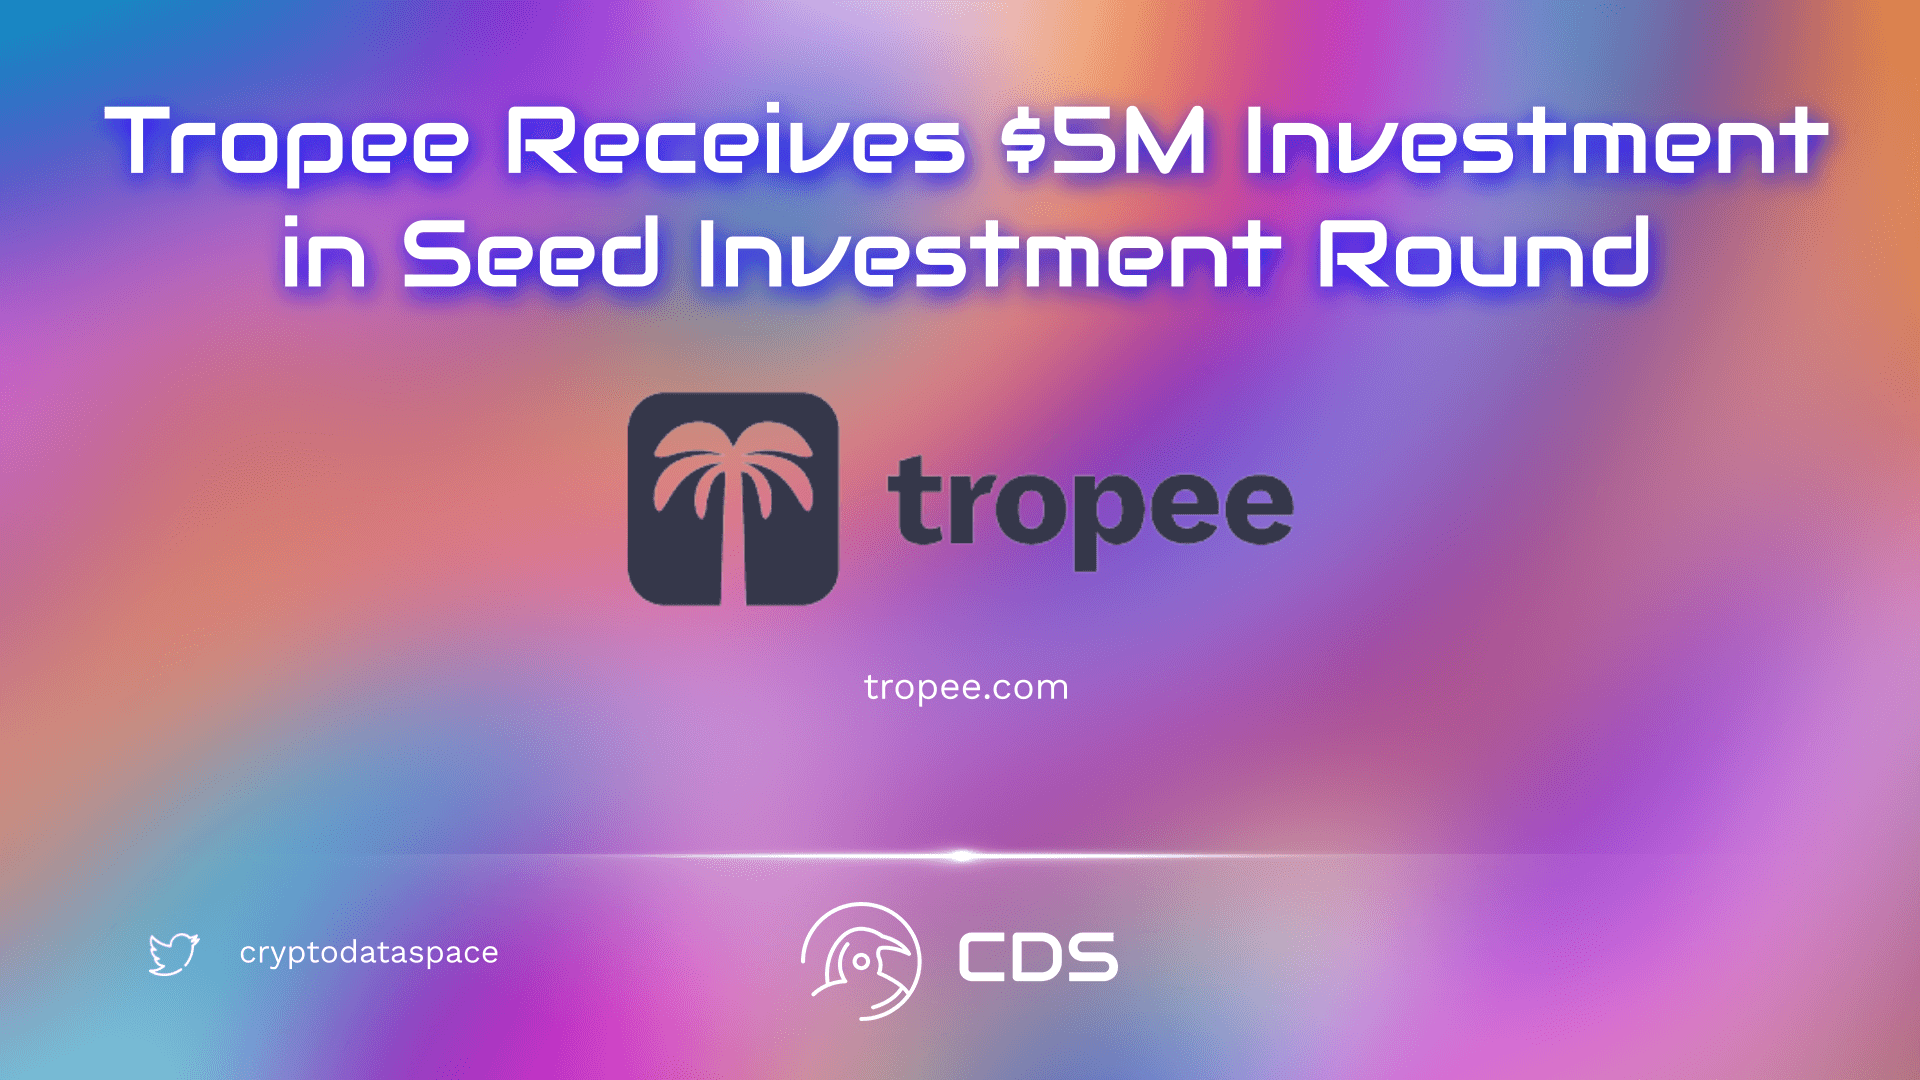 Tropee Receives $5M Investment in Seed Investment Round